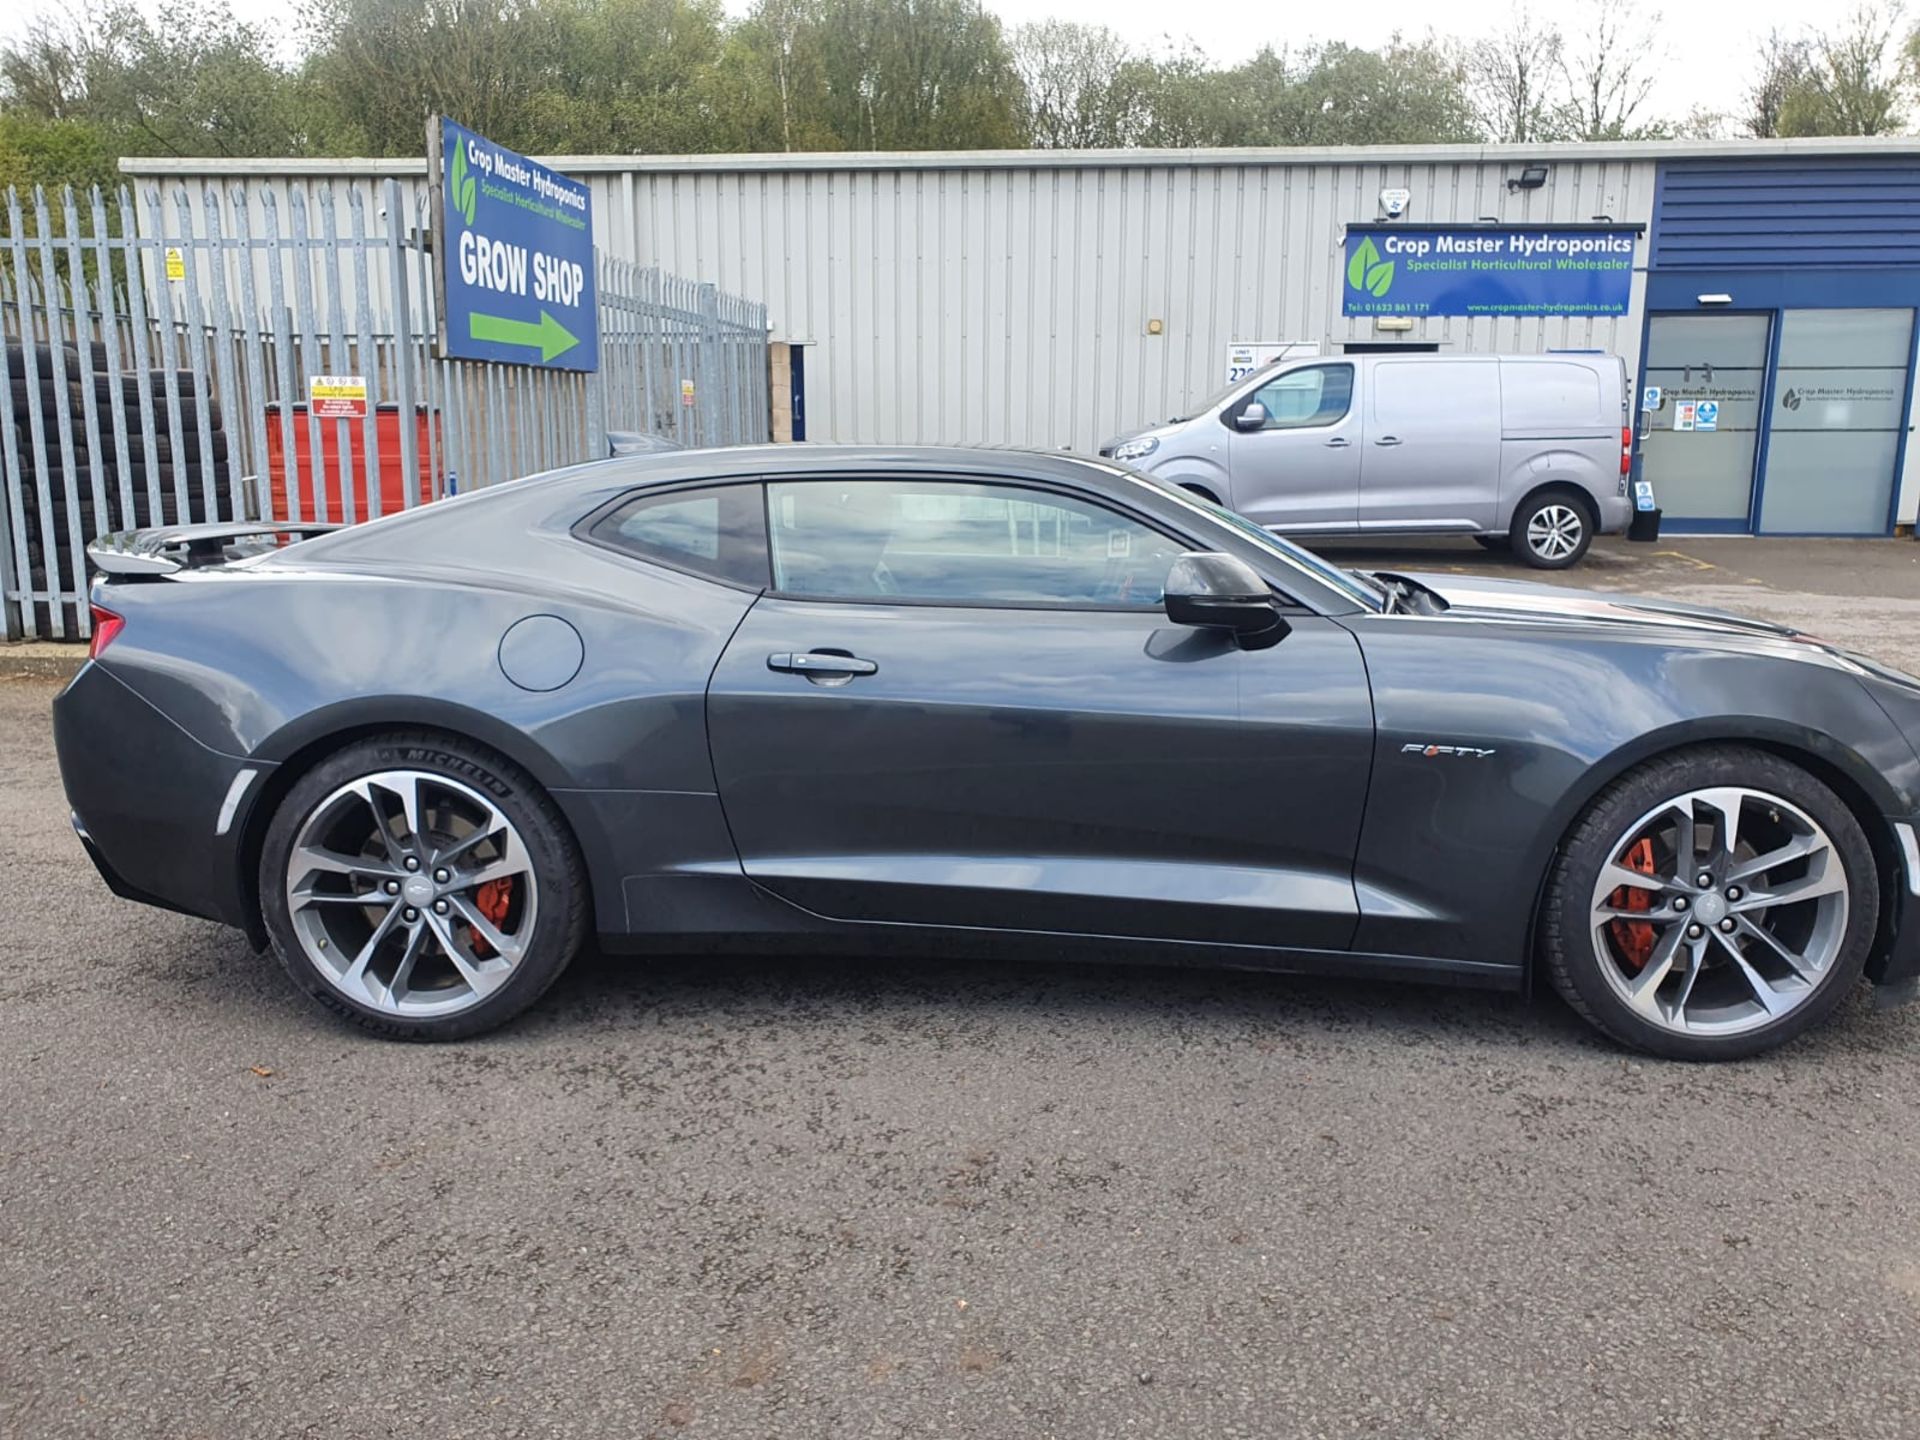 2017/17 REG CHEVROLET CAMARO V8 AUTOMATIC GREY COUPE 50th ANNIVERSARY EDITION, LHD, LOW MILEAGE - Image 12 of 43